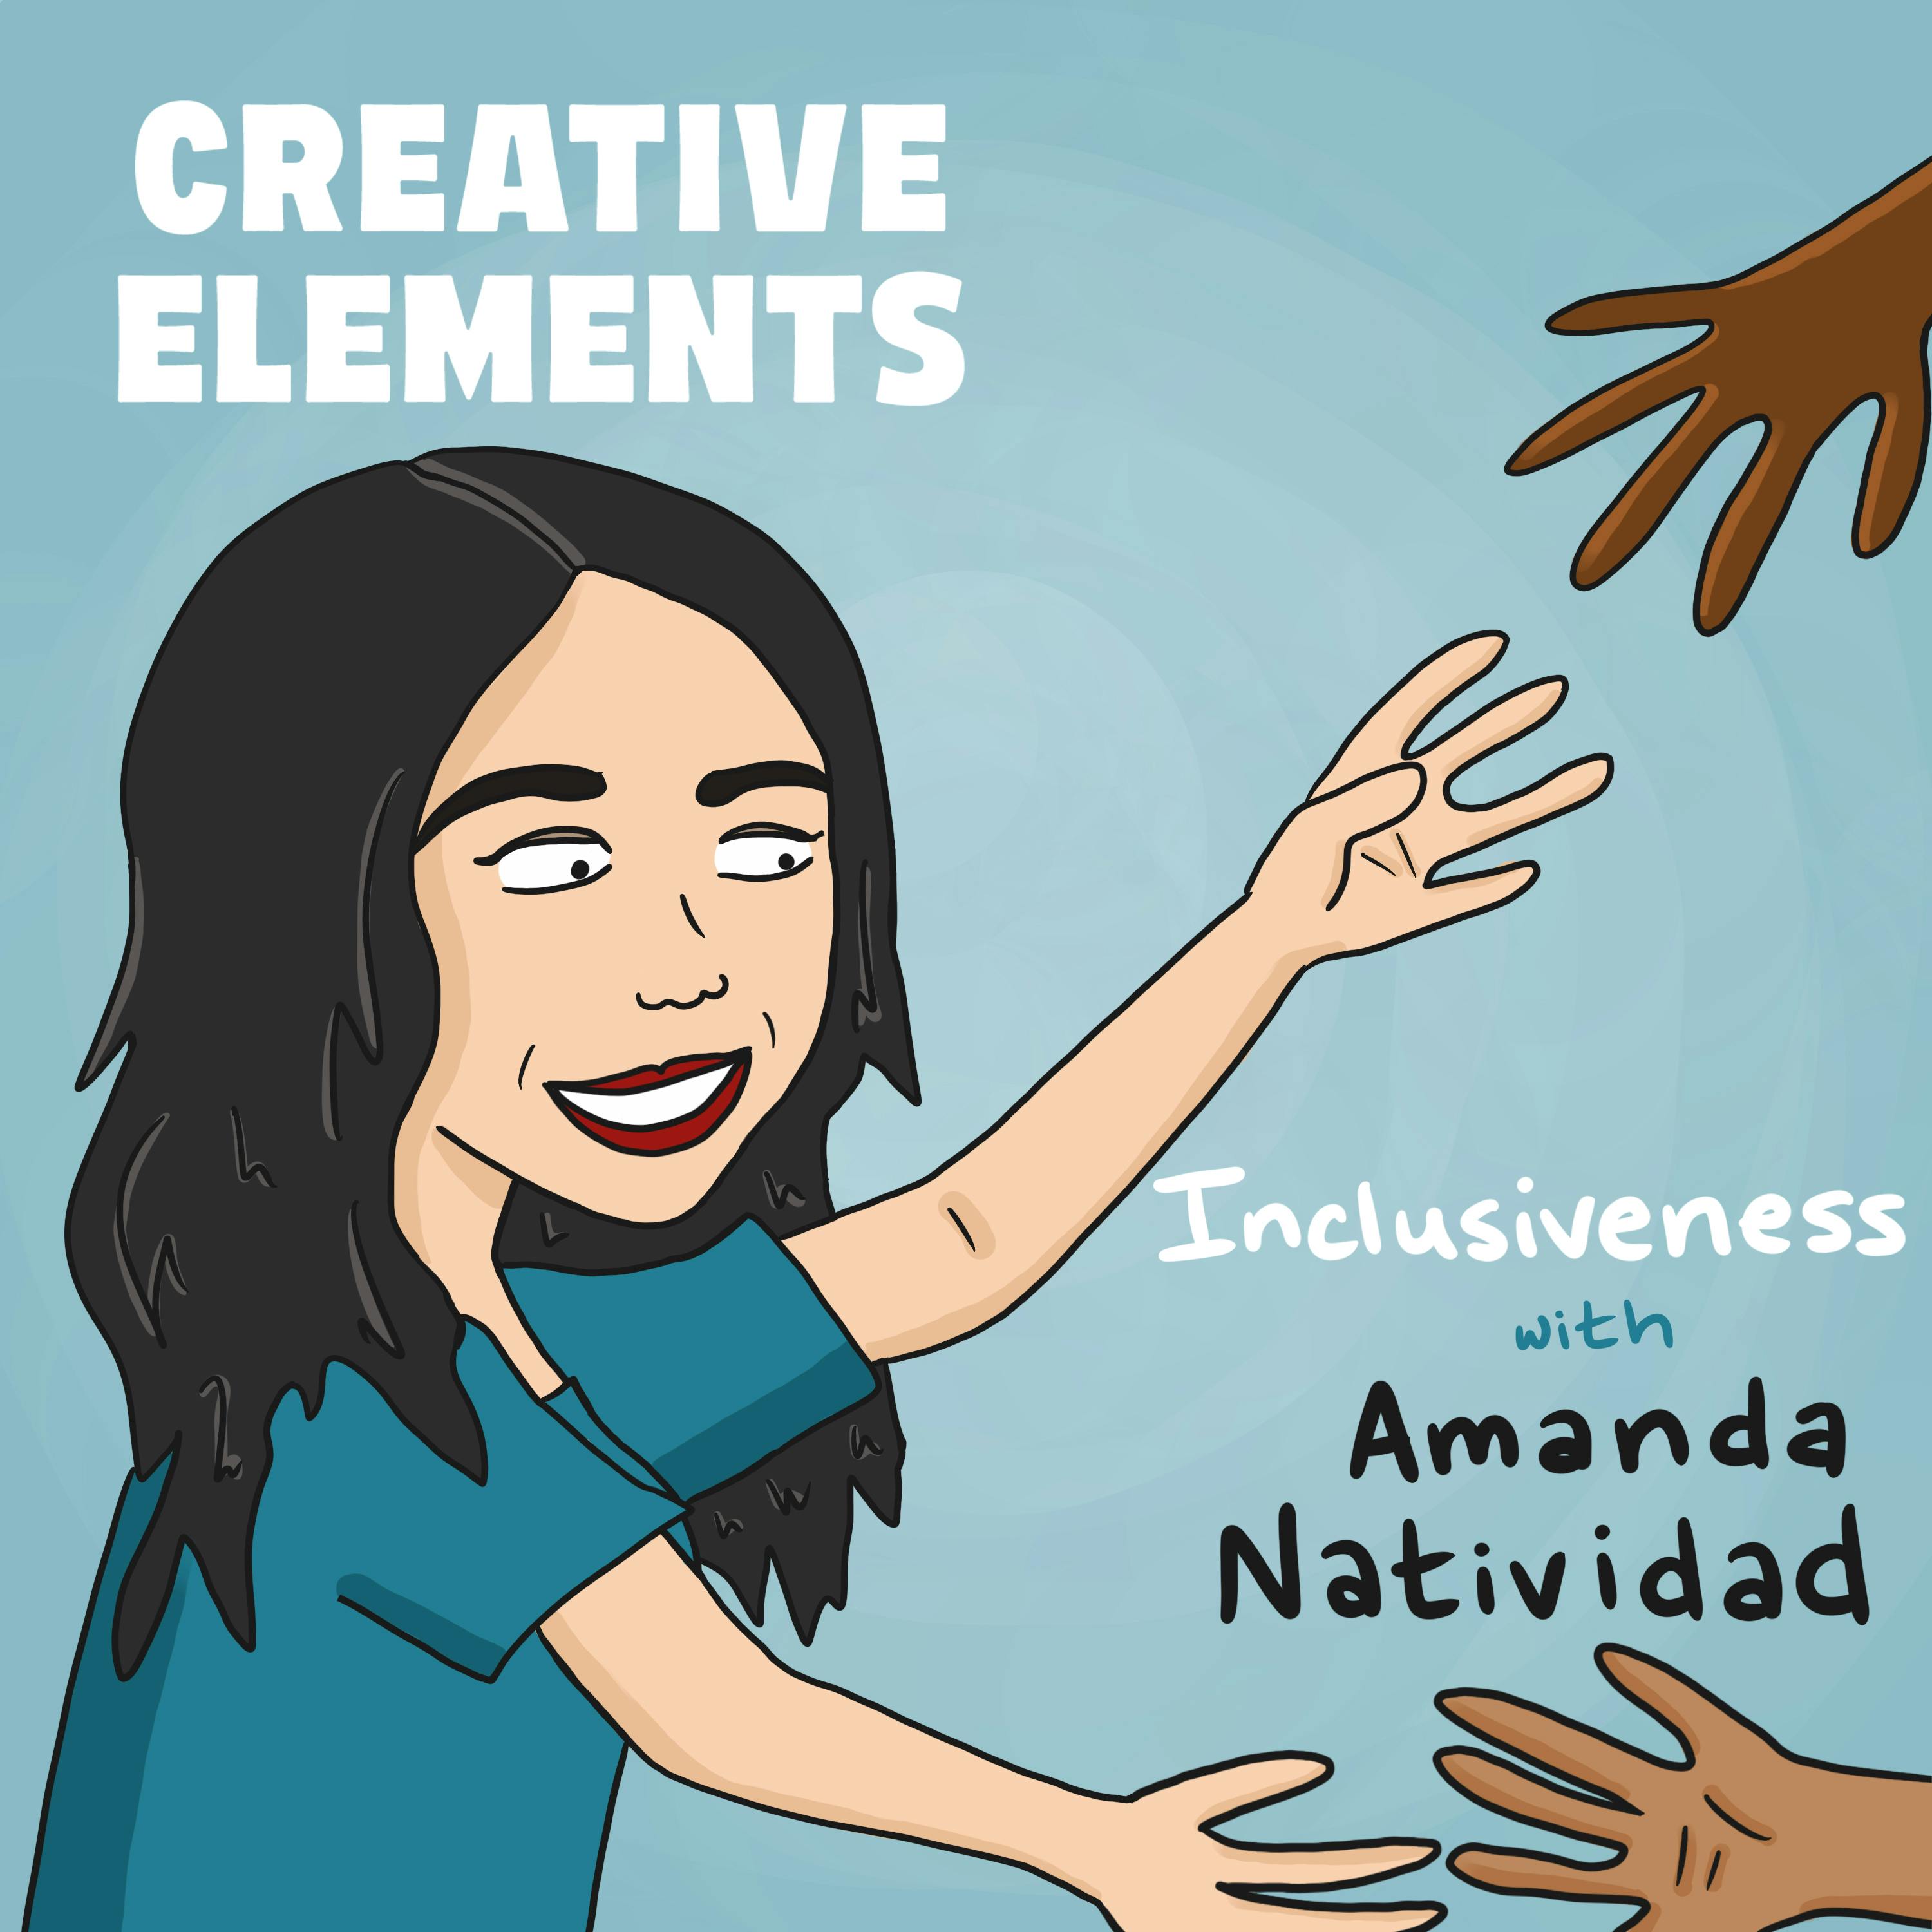 #99: Amanda Natividad [Inclusiveness] – Growing on Twitter and using her platform to lift up others Image